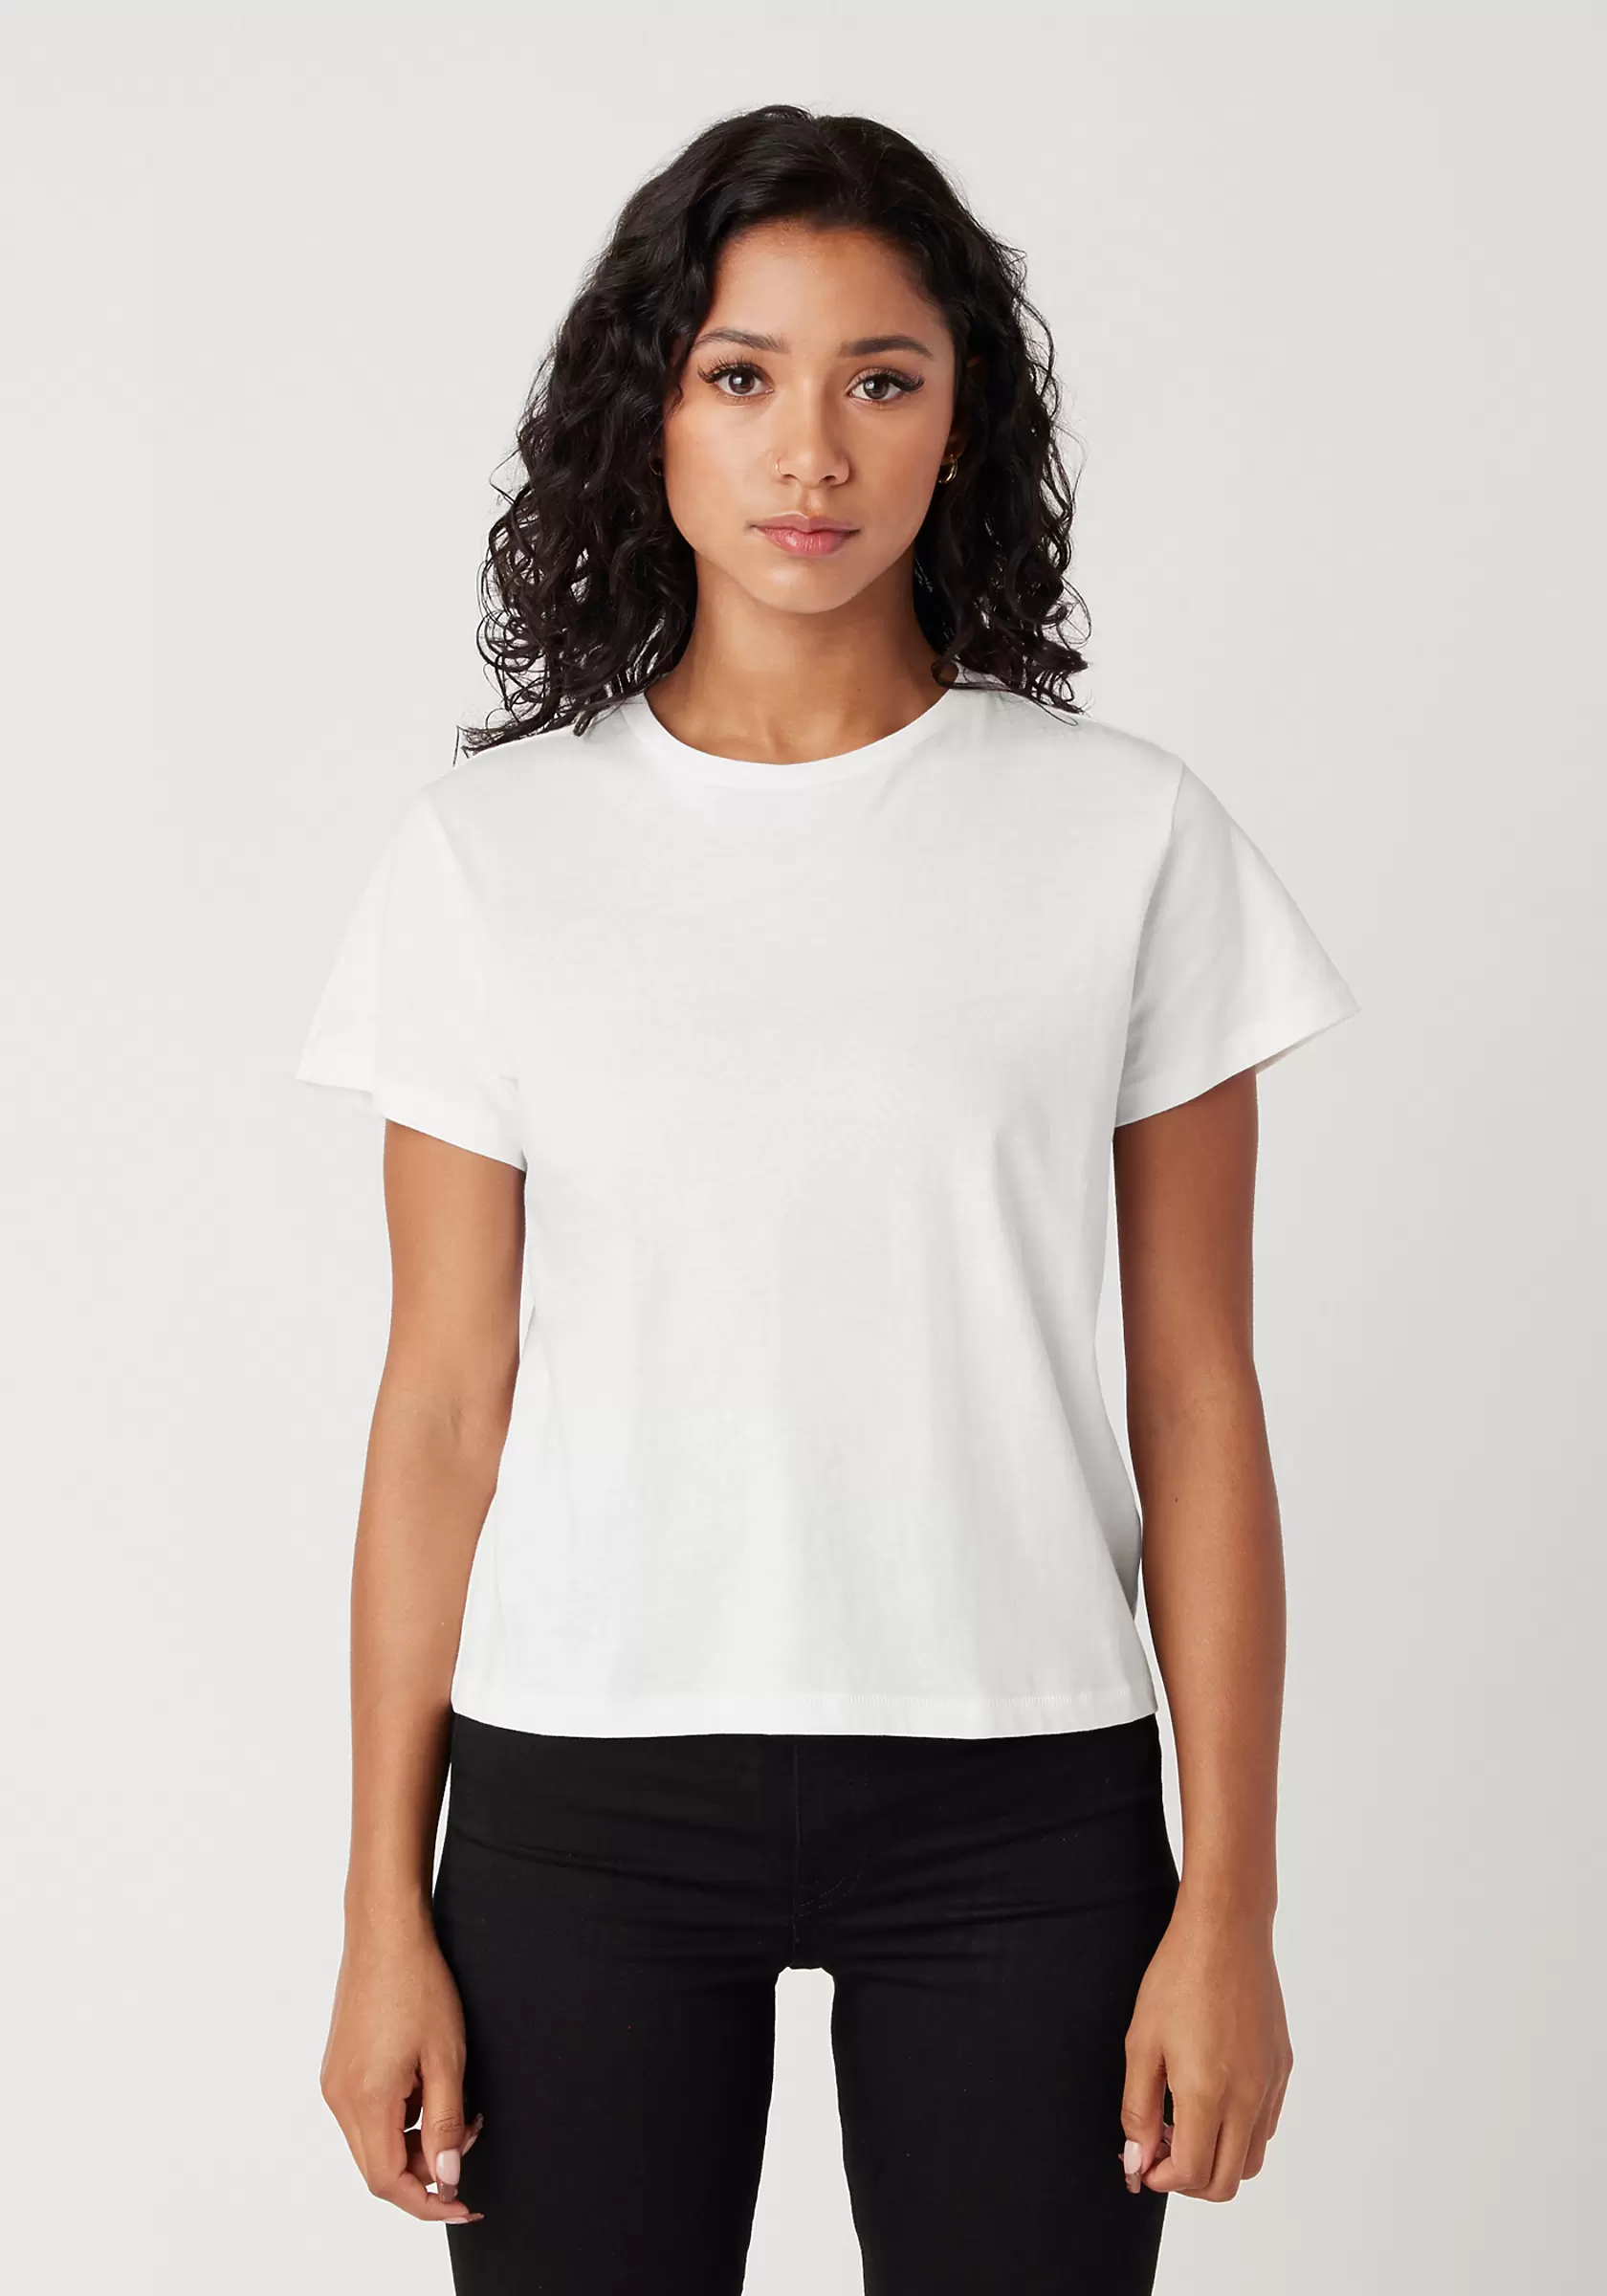 Cotton Heritage OW1086 High-Waisted Crop Tee - From $4.57